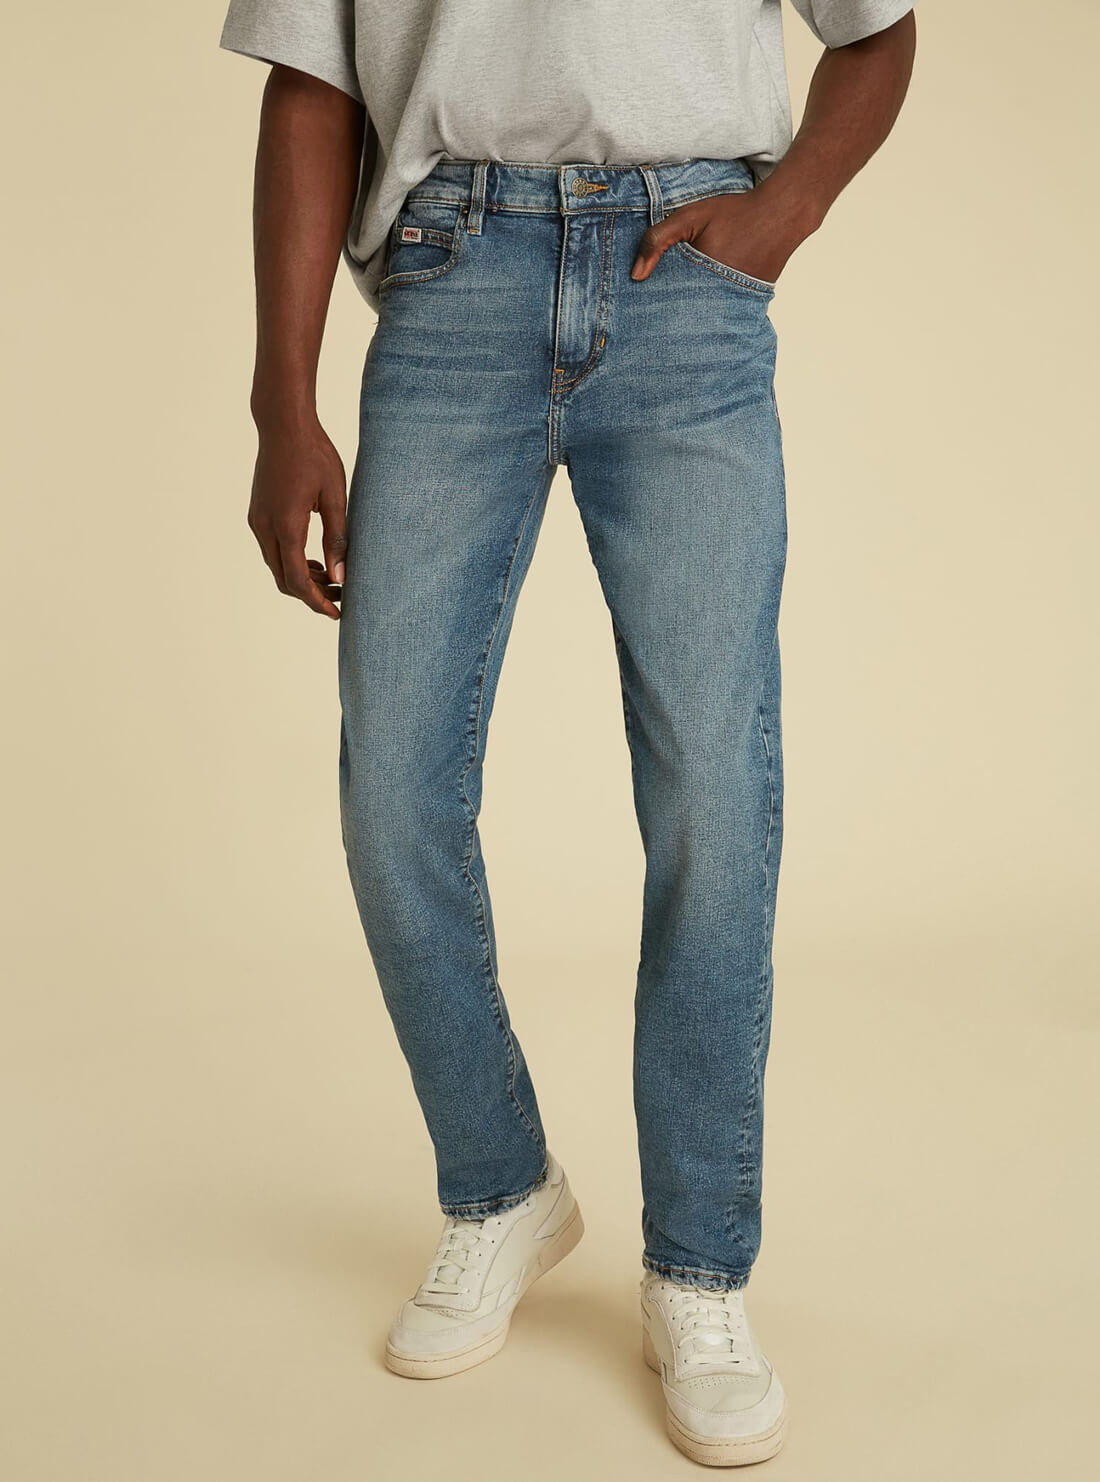 GUESS Mens GUESS Originals Mid-Rise Slim Straight Denim Jeans in Vintage Stone Wash M1GA05R49T0 Model Front View